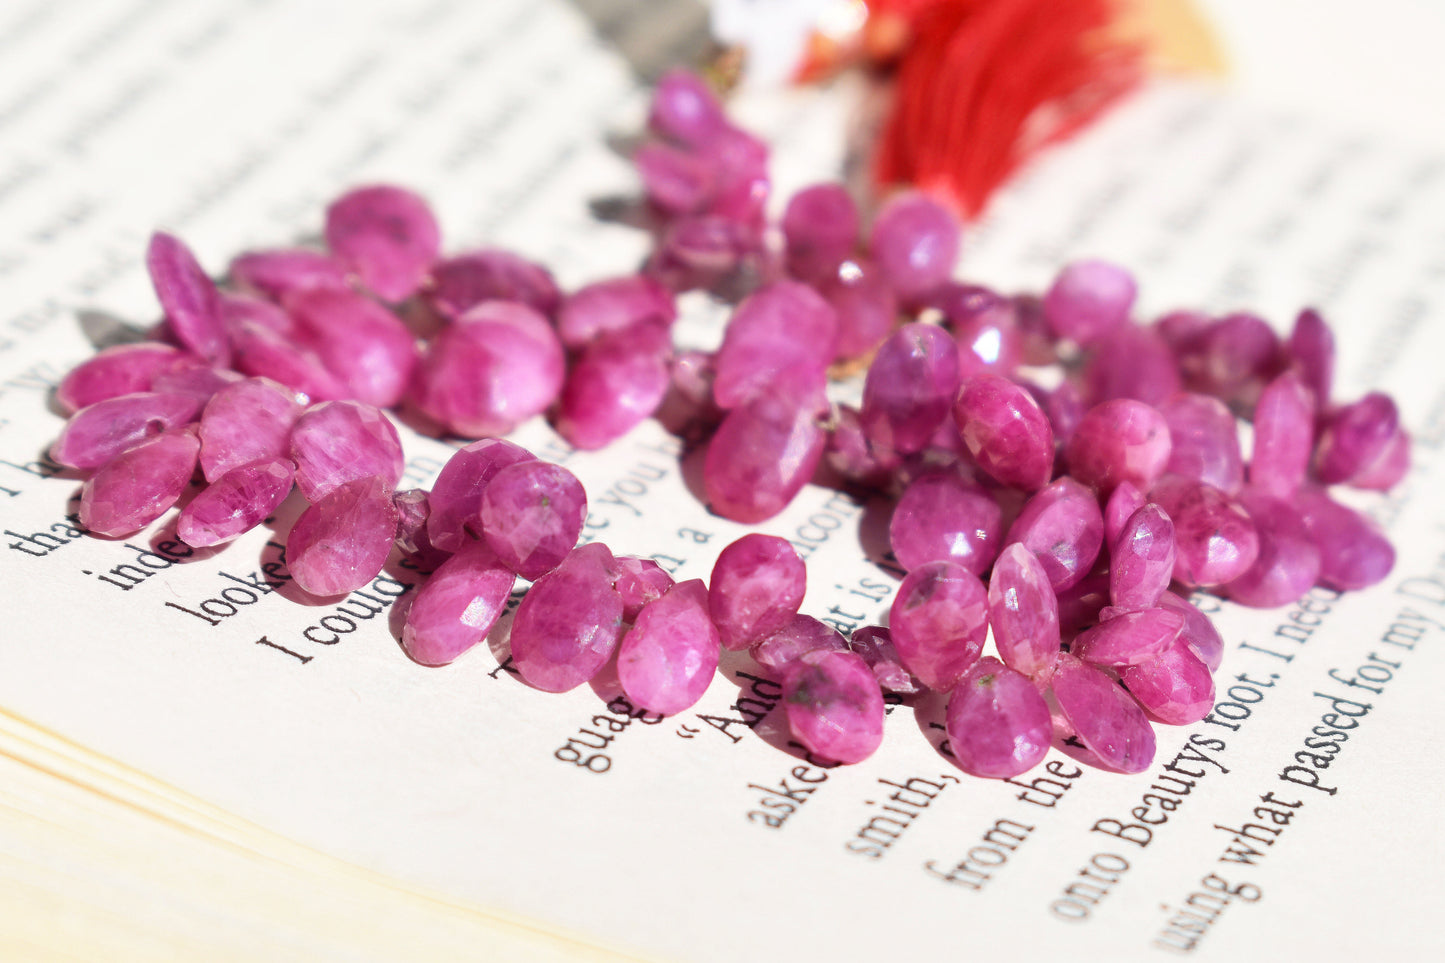 Ruby Pear Beads - Graduated & Faceted 3-7.5mm